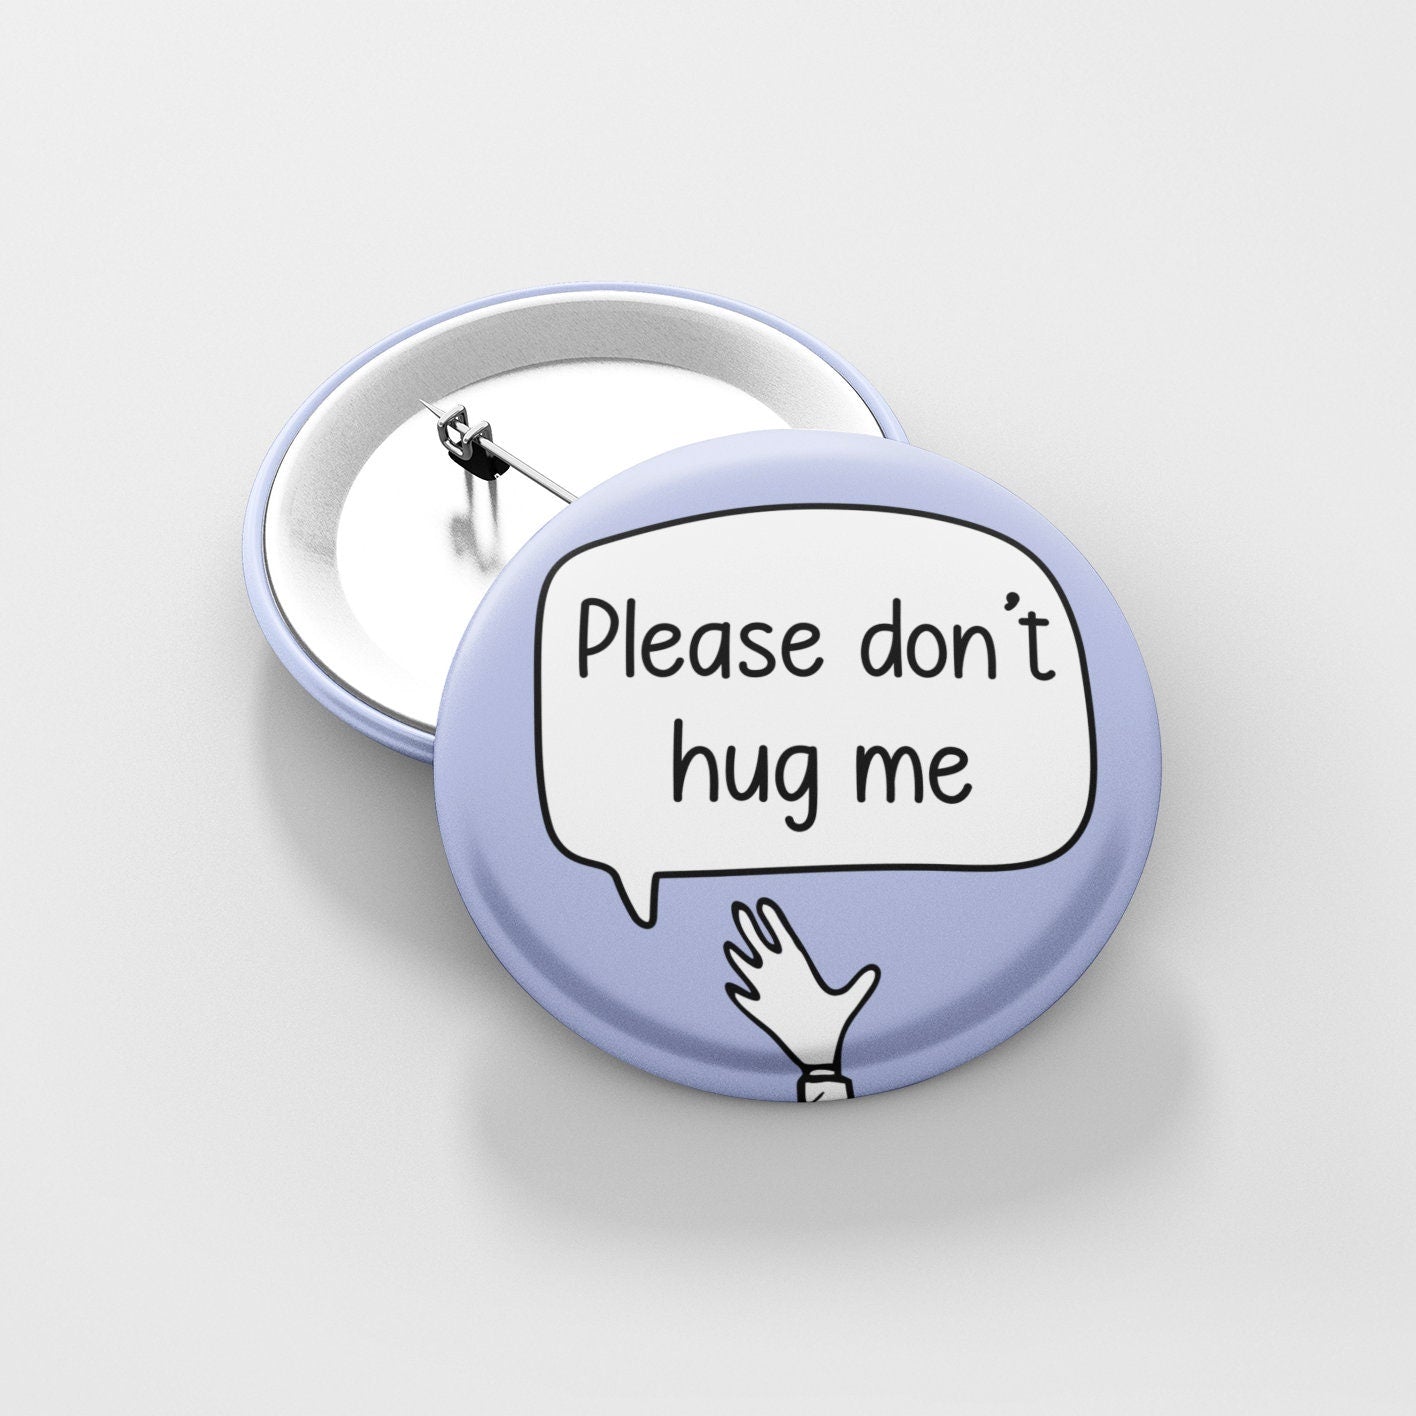 Please Don't Hug Me Badge Pin | Respect Boundaries - I don’t hug - don’t touch me - personal space